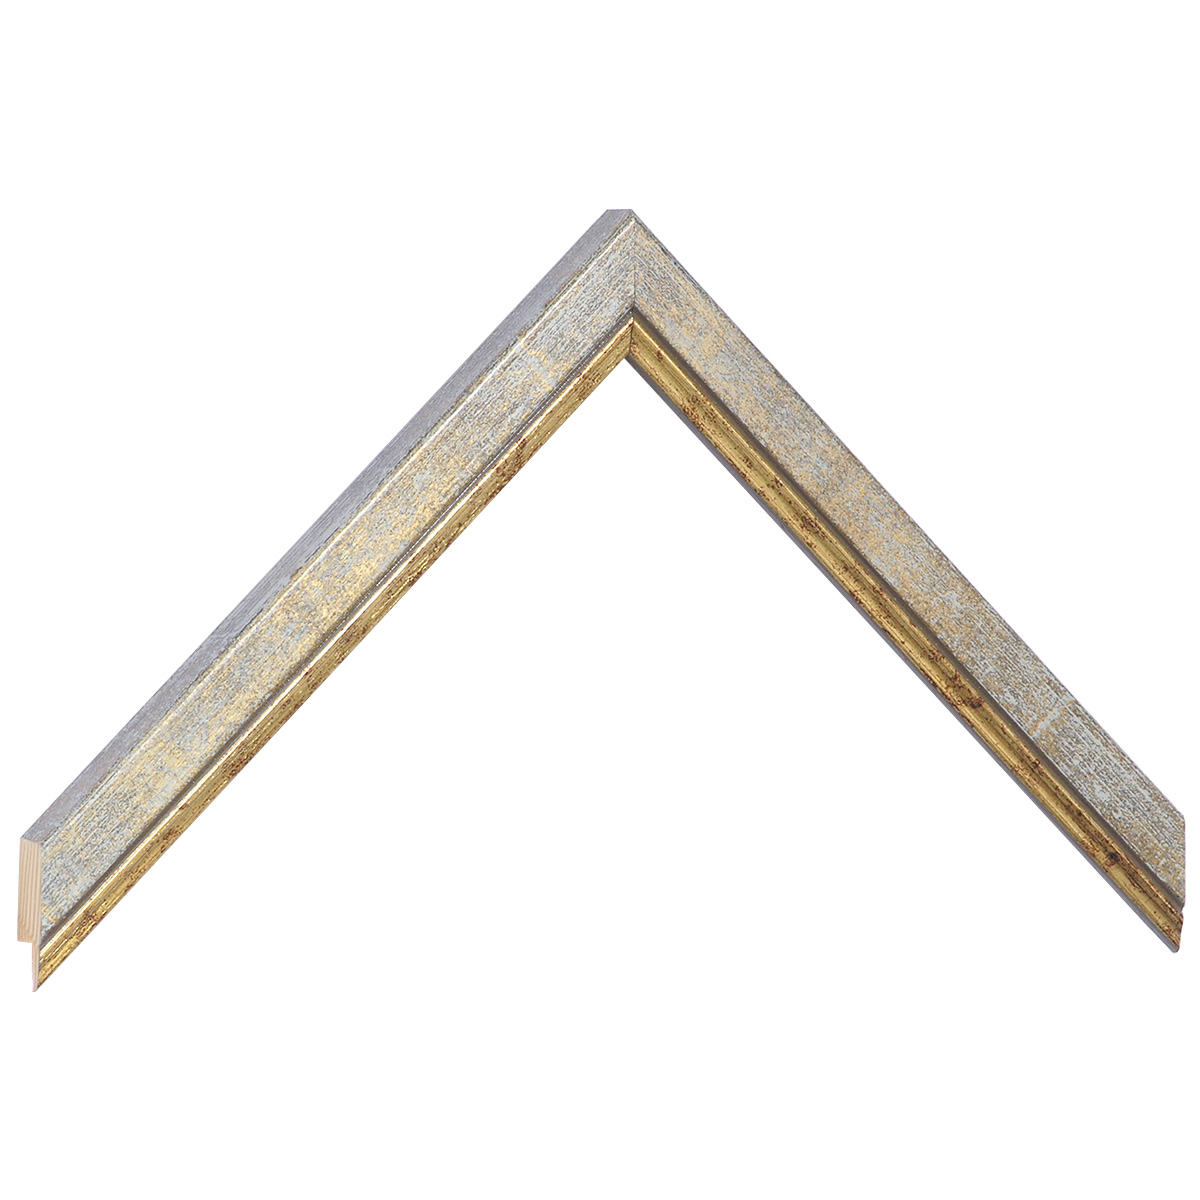 Moulding finger-jointed pine 18mm - white with gold edge - Sample